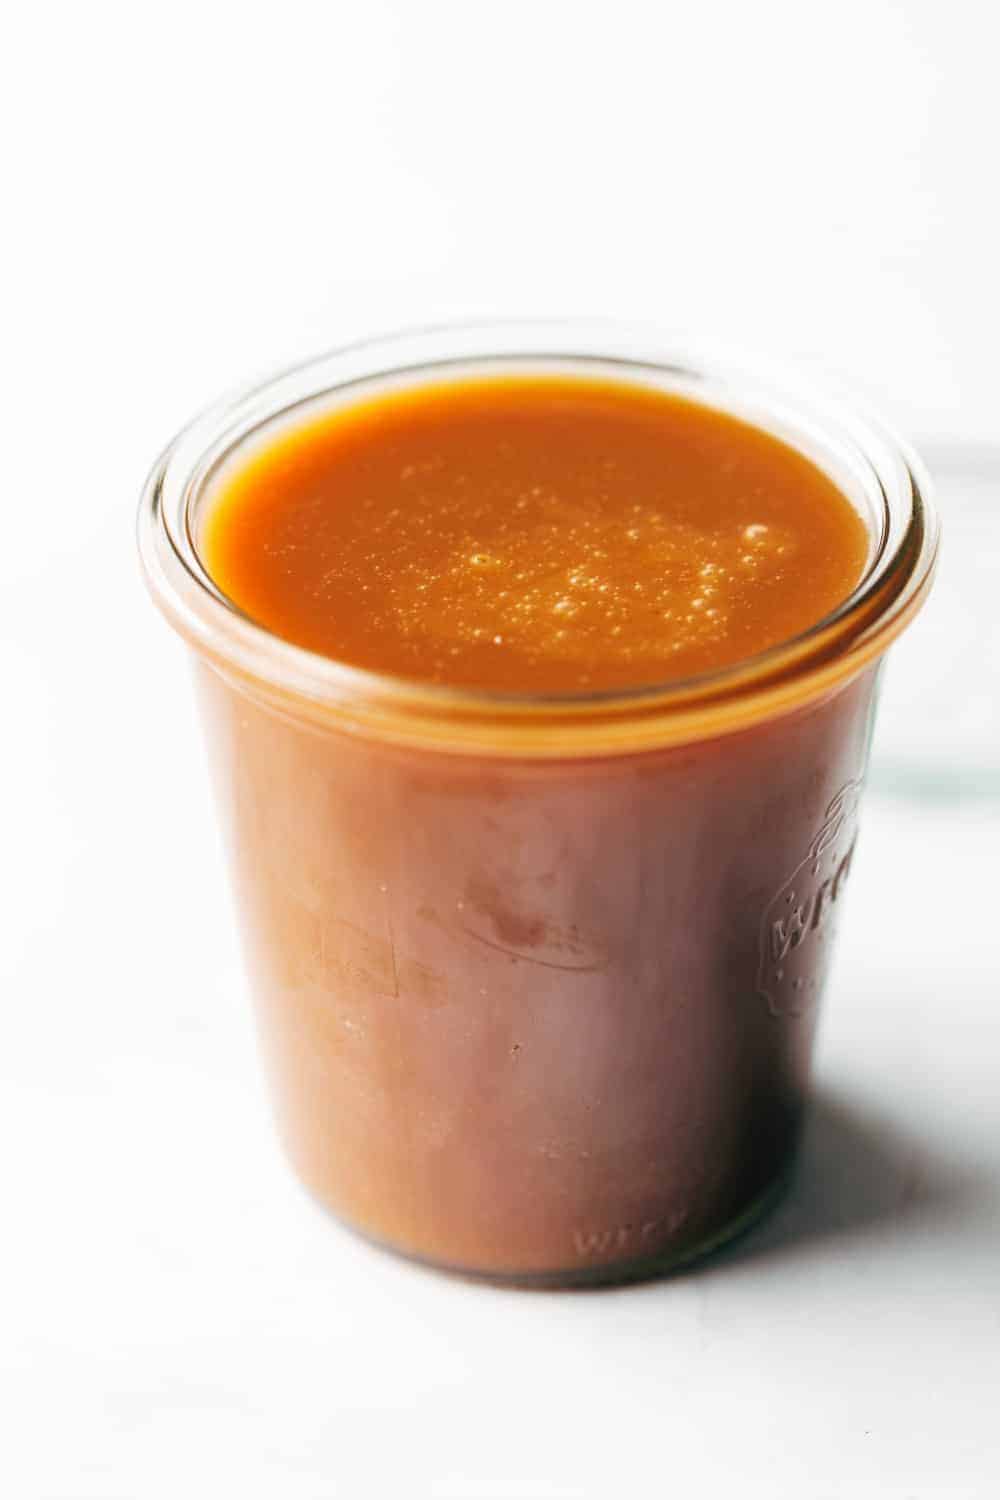 Salted caramel sauce is easy to make at home and is delicious on everything